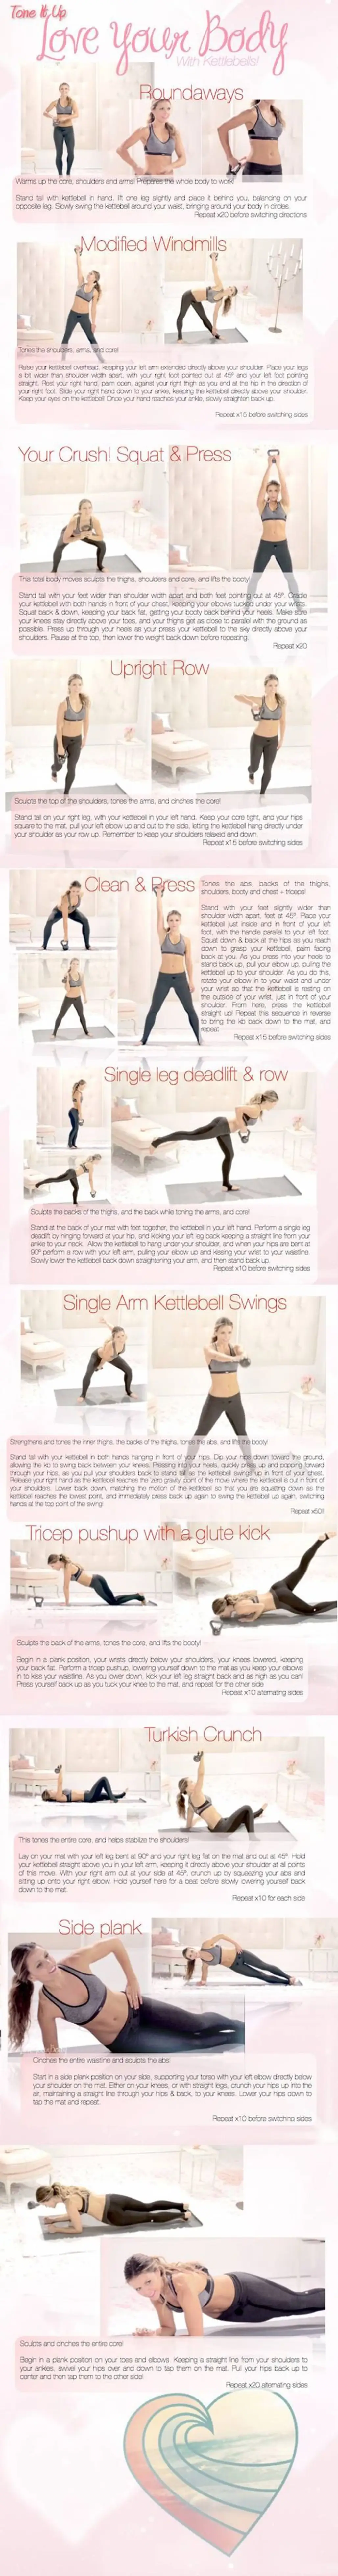 Sculpt Your Chest with a Custom Printable Workout